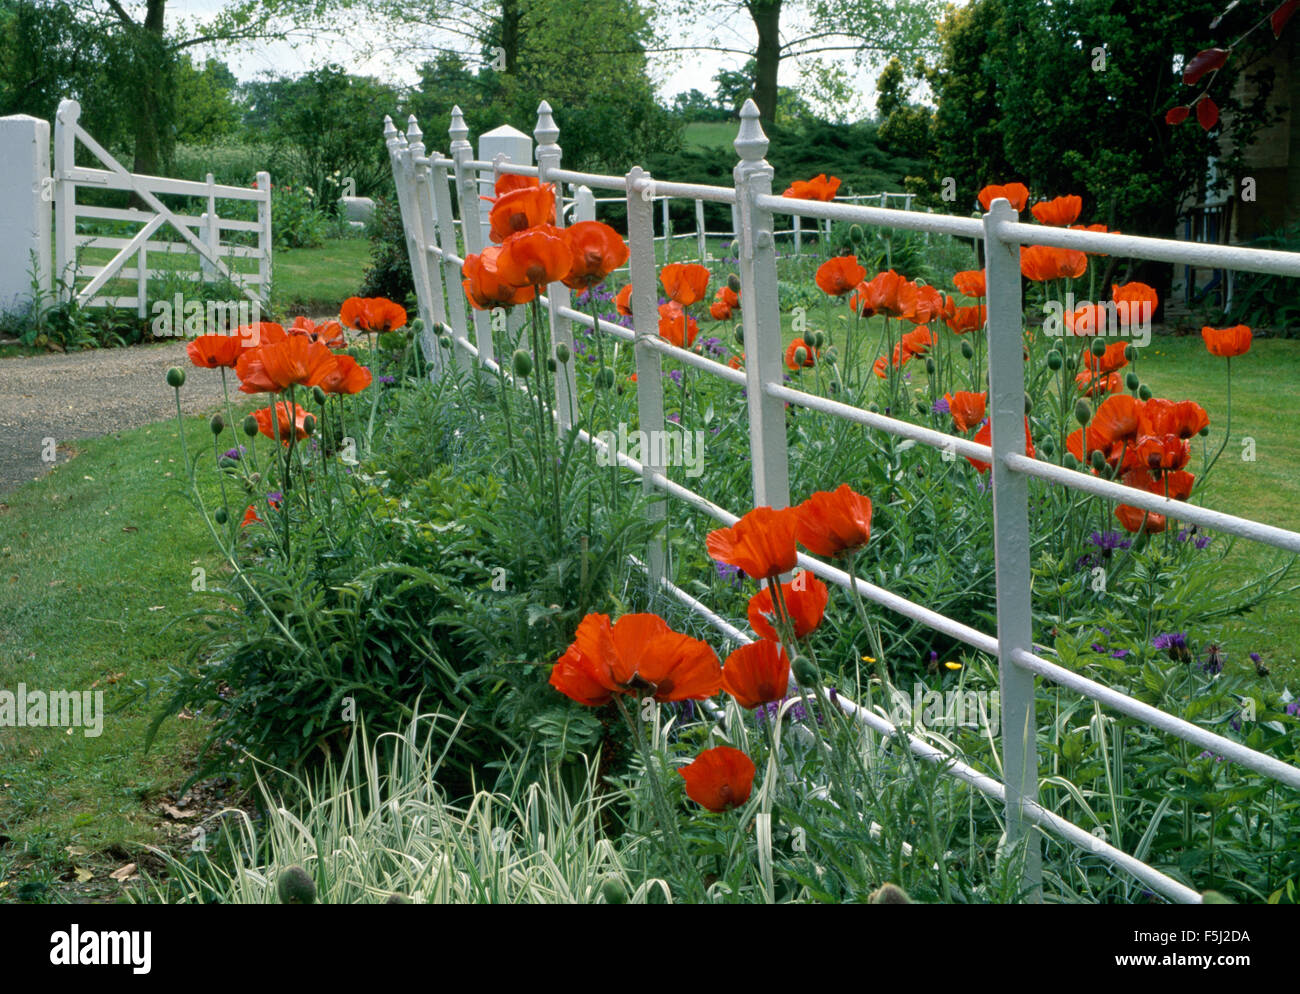 Red Papaver Orientalis in border beside white painted iron railings in country garden Stock Photo